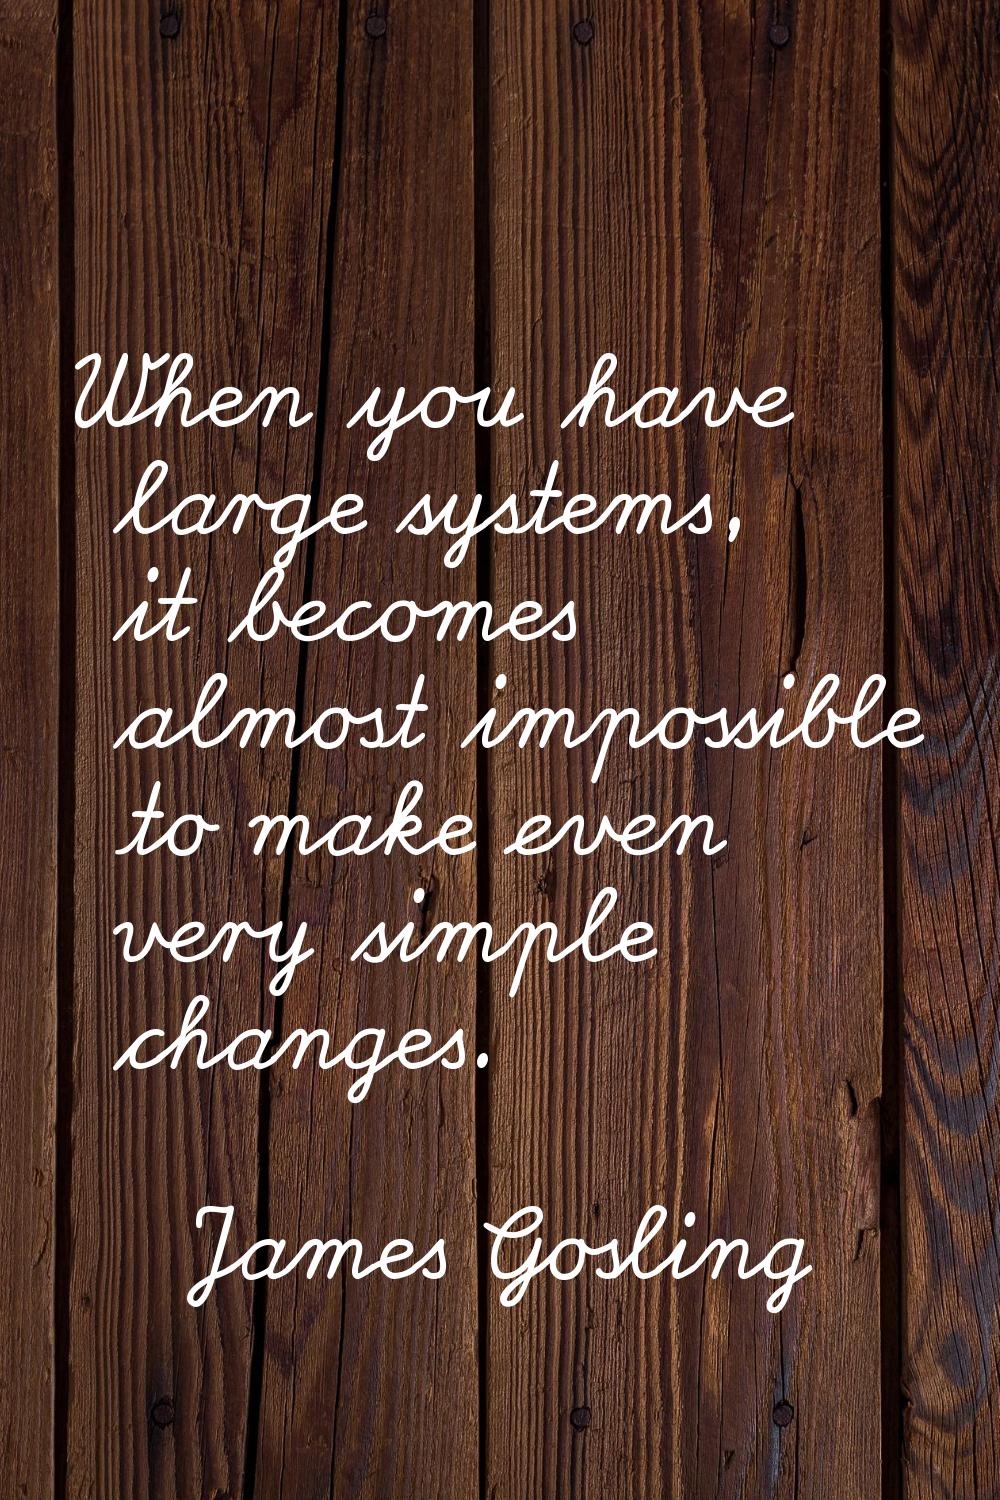 When you have large systems, it becomes almost impossible to make even very simple changes.